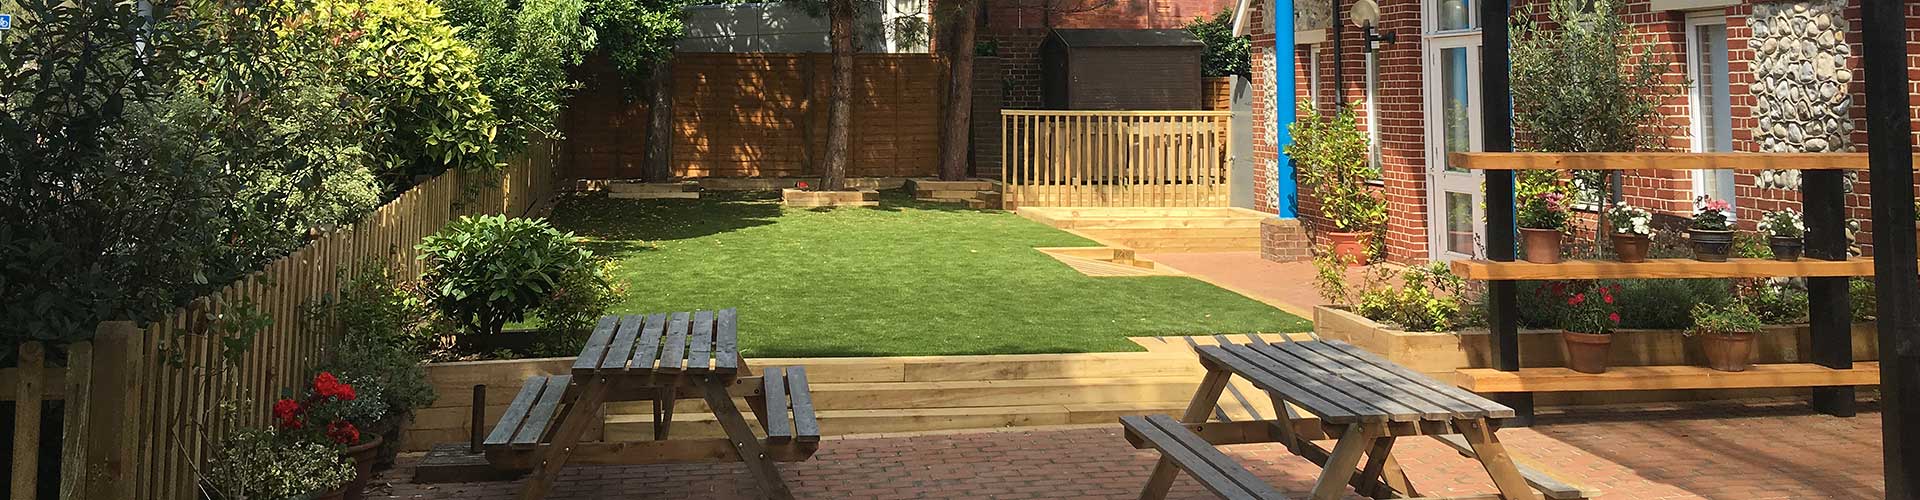 Artificial Grass for Play Areas | The Sussex Artificial Grass Company